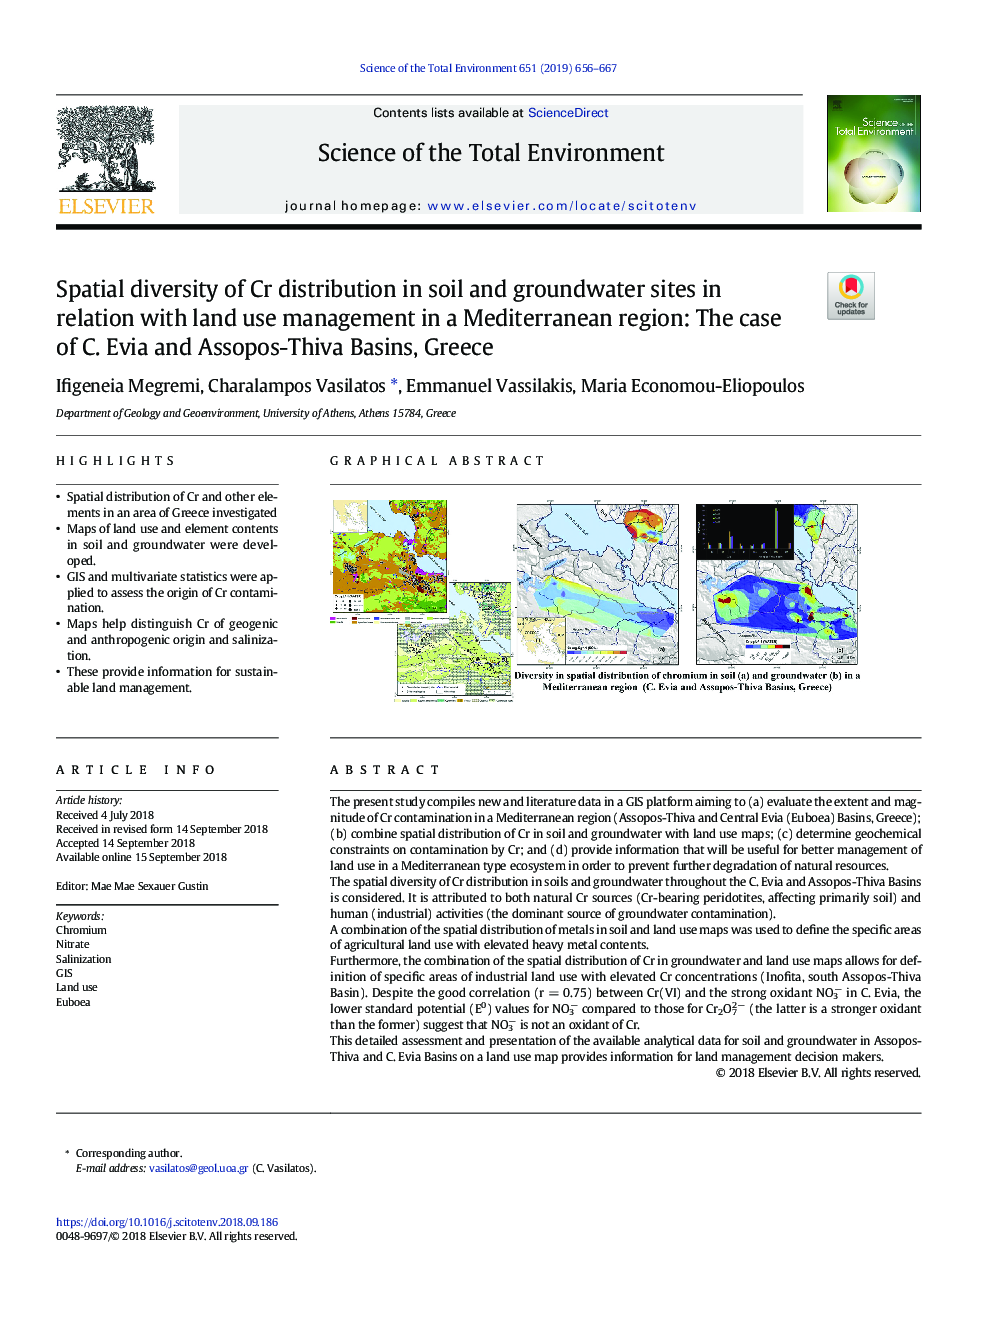 Spatial diversity of Cr distribution in soil and groundwater sites in relation with land use management in a Mediterranean region: The case of C. Evia and Assopos-Thiva Basins, Greece